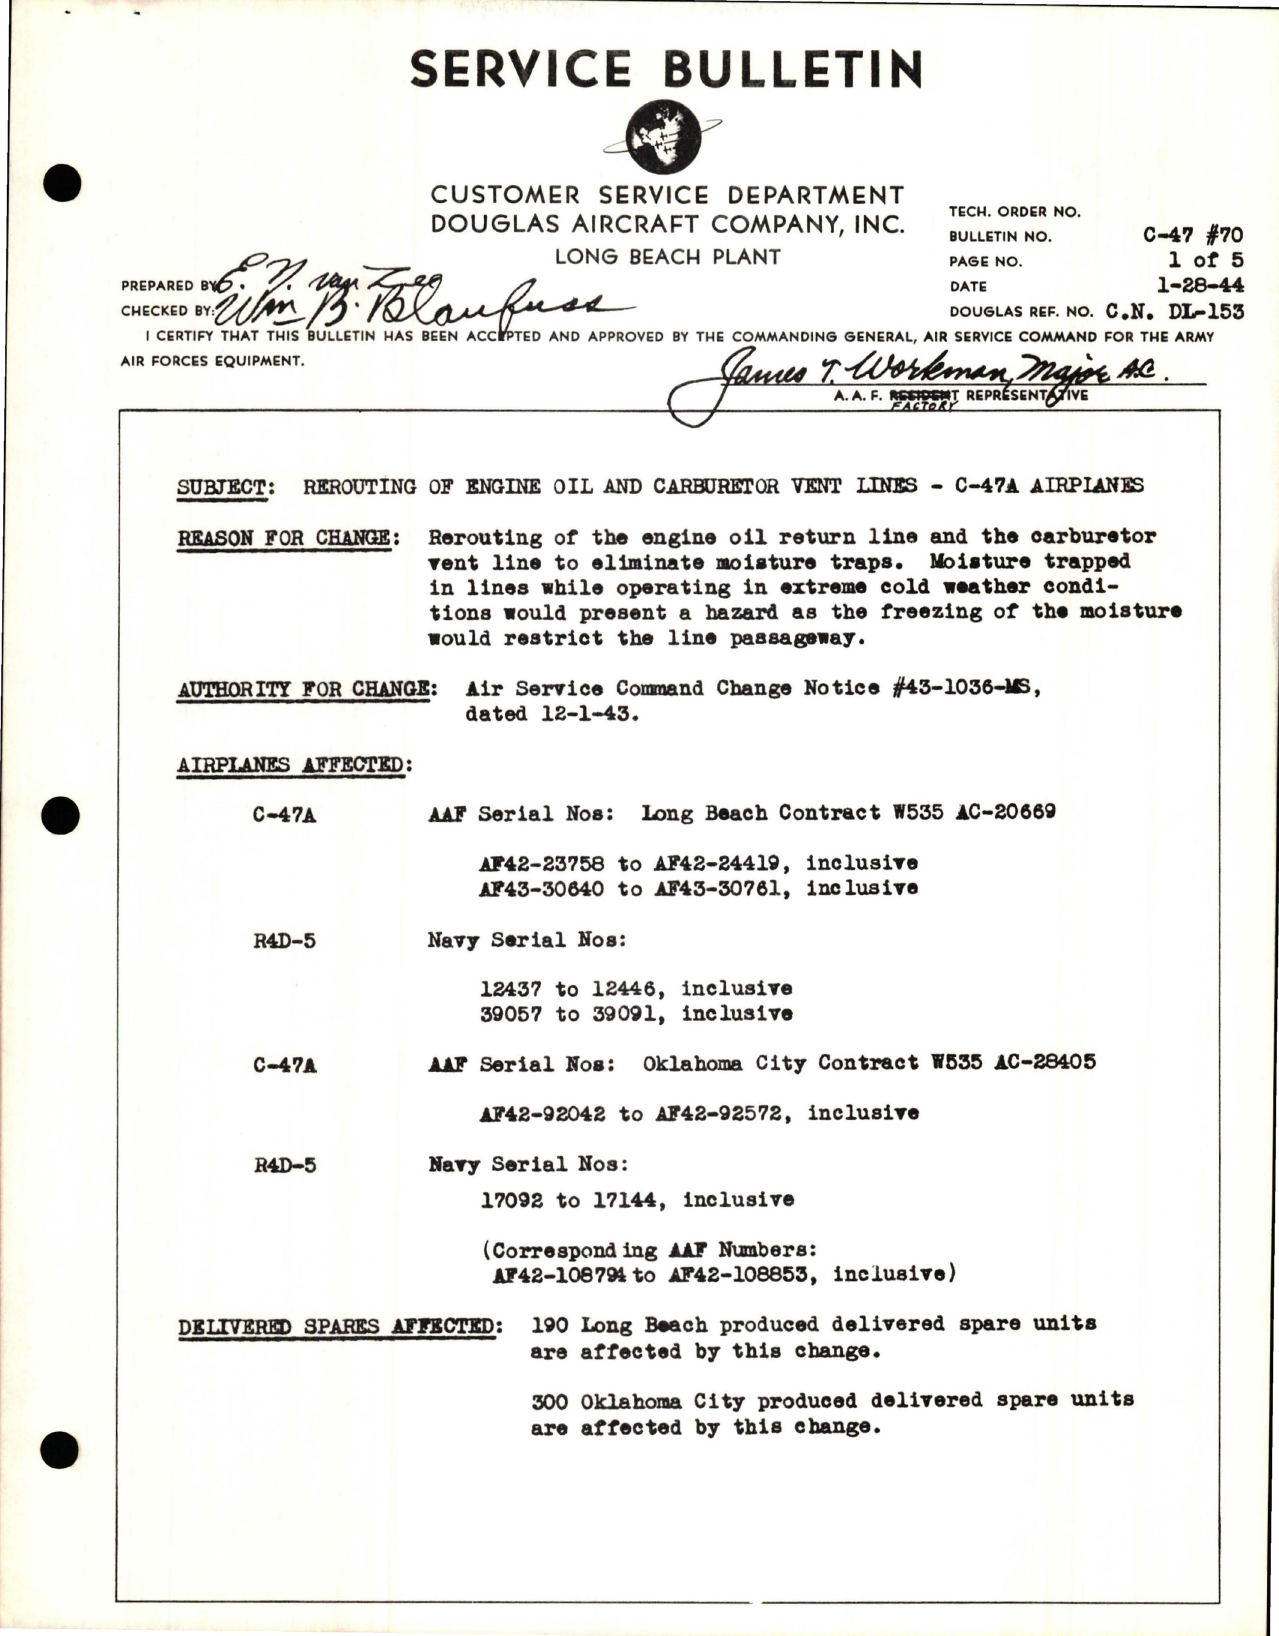 Sample page 1 from AirCorps Library document: Rerouting of Engine Oil and Carburetor Vent Lines